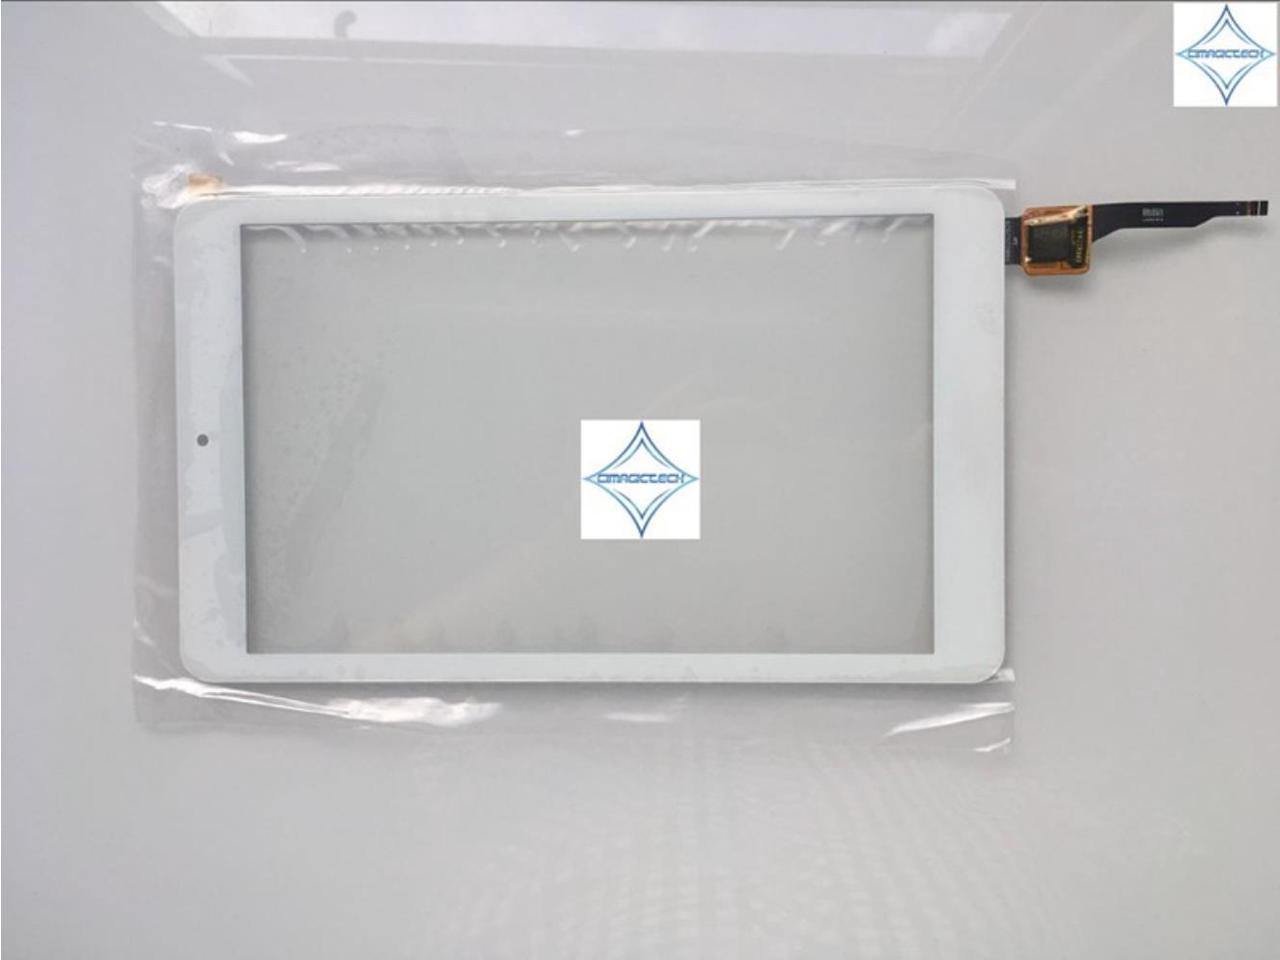 New 8" Tablet PB80JG2928 Touch screen digitizer panel Free Shipping 